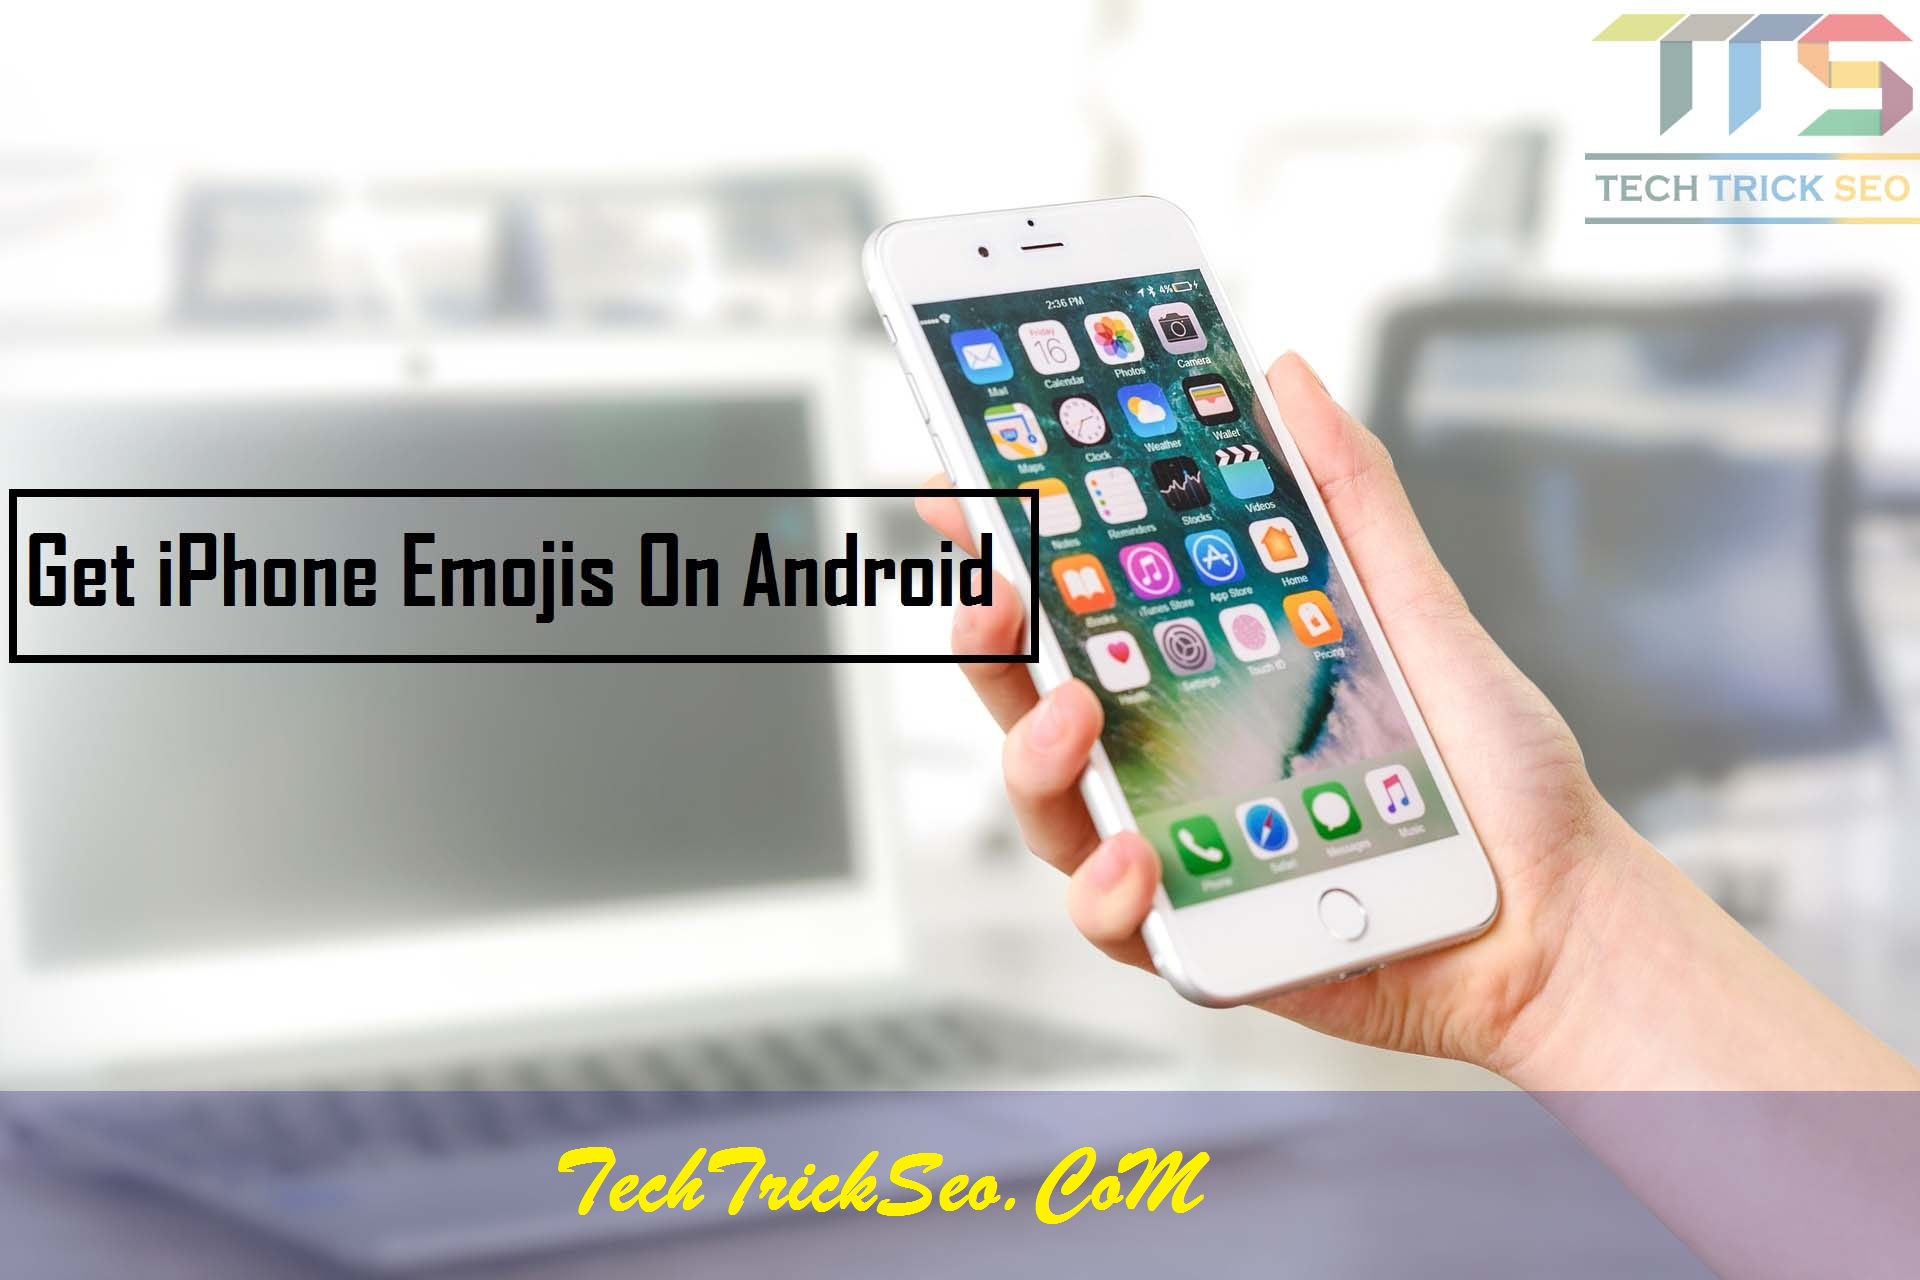 can ios 10.2 emojis be put on android without rooting